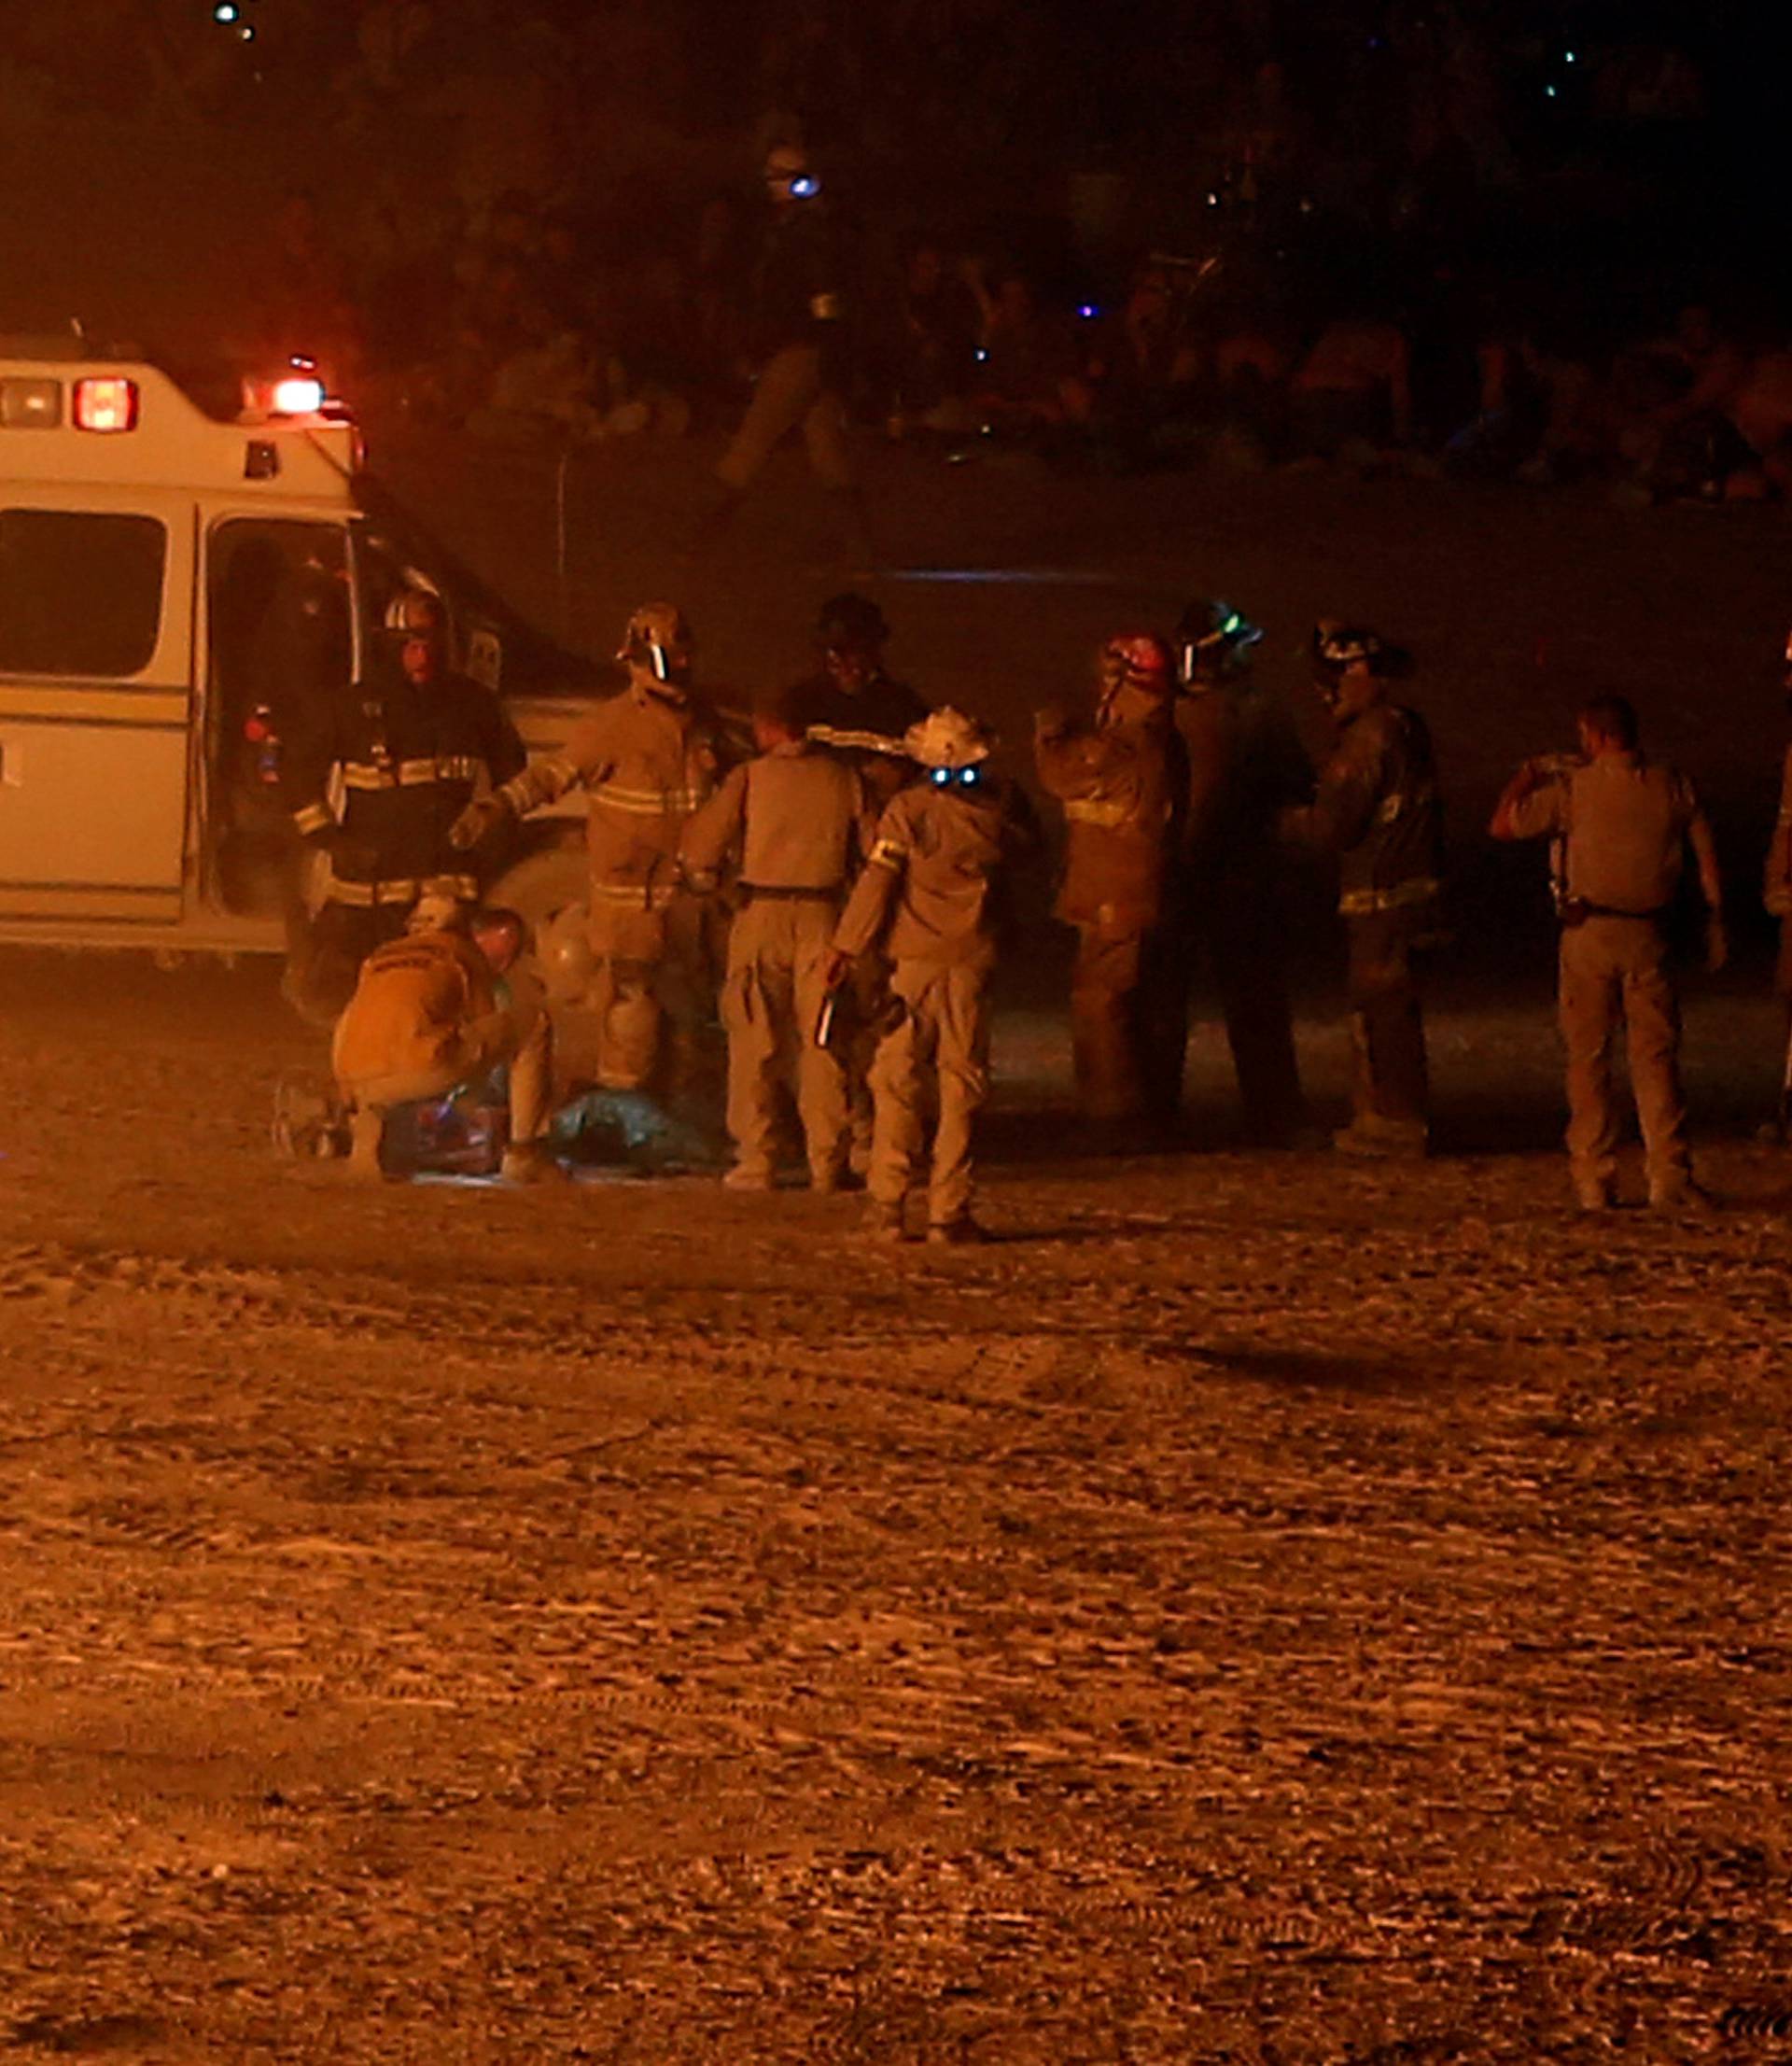 Emergency personnel respond to a participant that ran into the flames at the Man burn as approximately 70,000 people from all over the world gathered for the annual Burning Man arts and music festival in the Black Rock Desert of Nevada